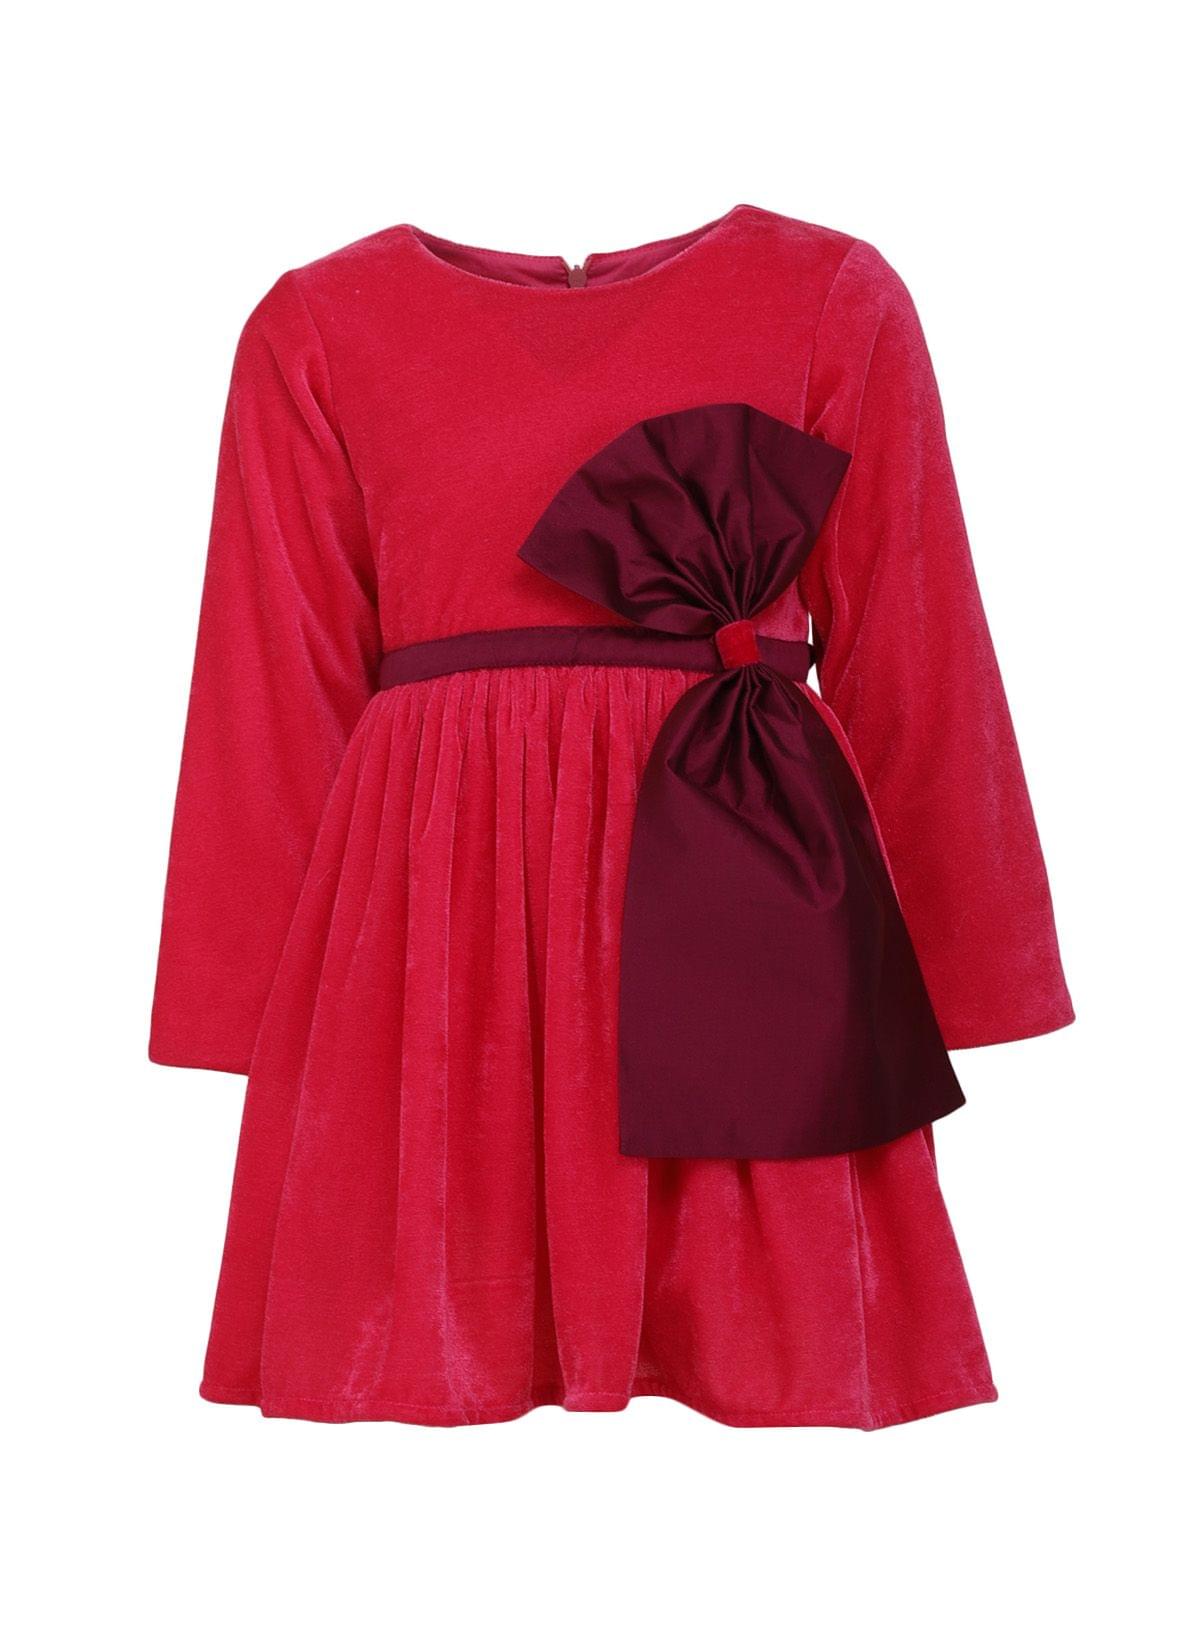 Red Bow Dress Full Sleeves